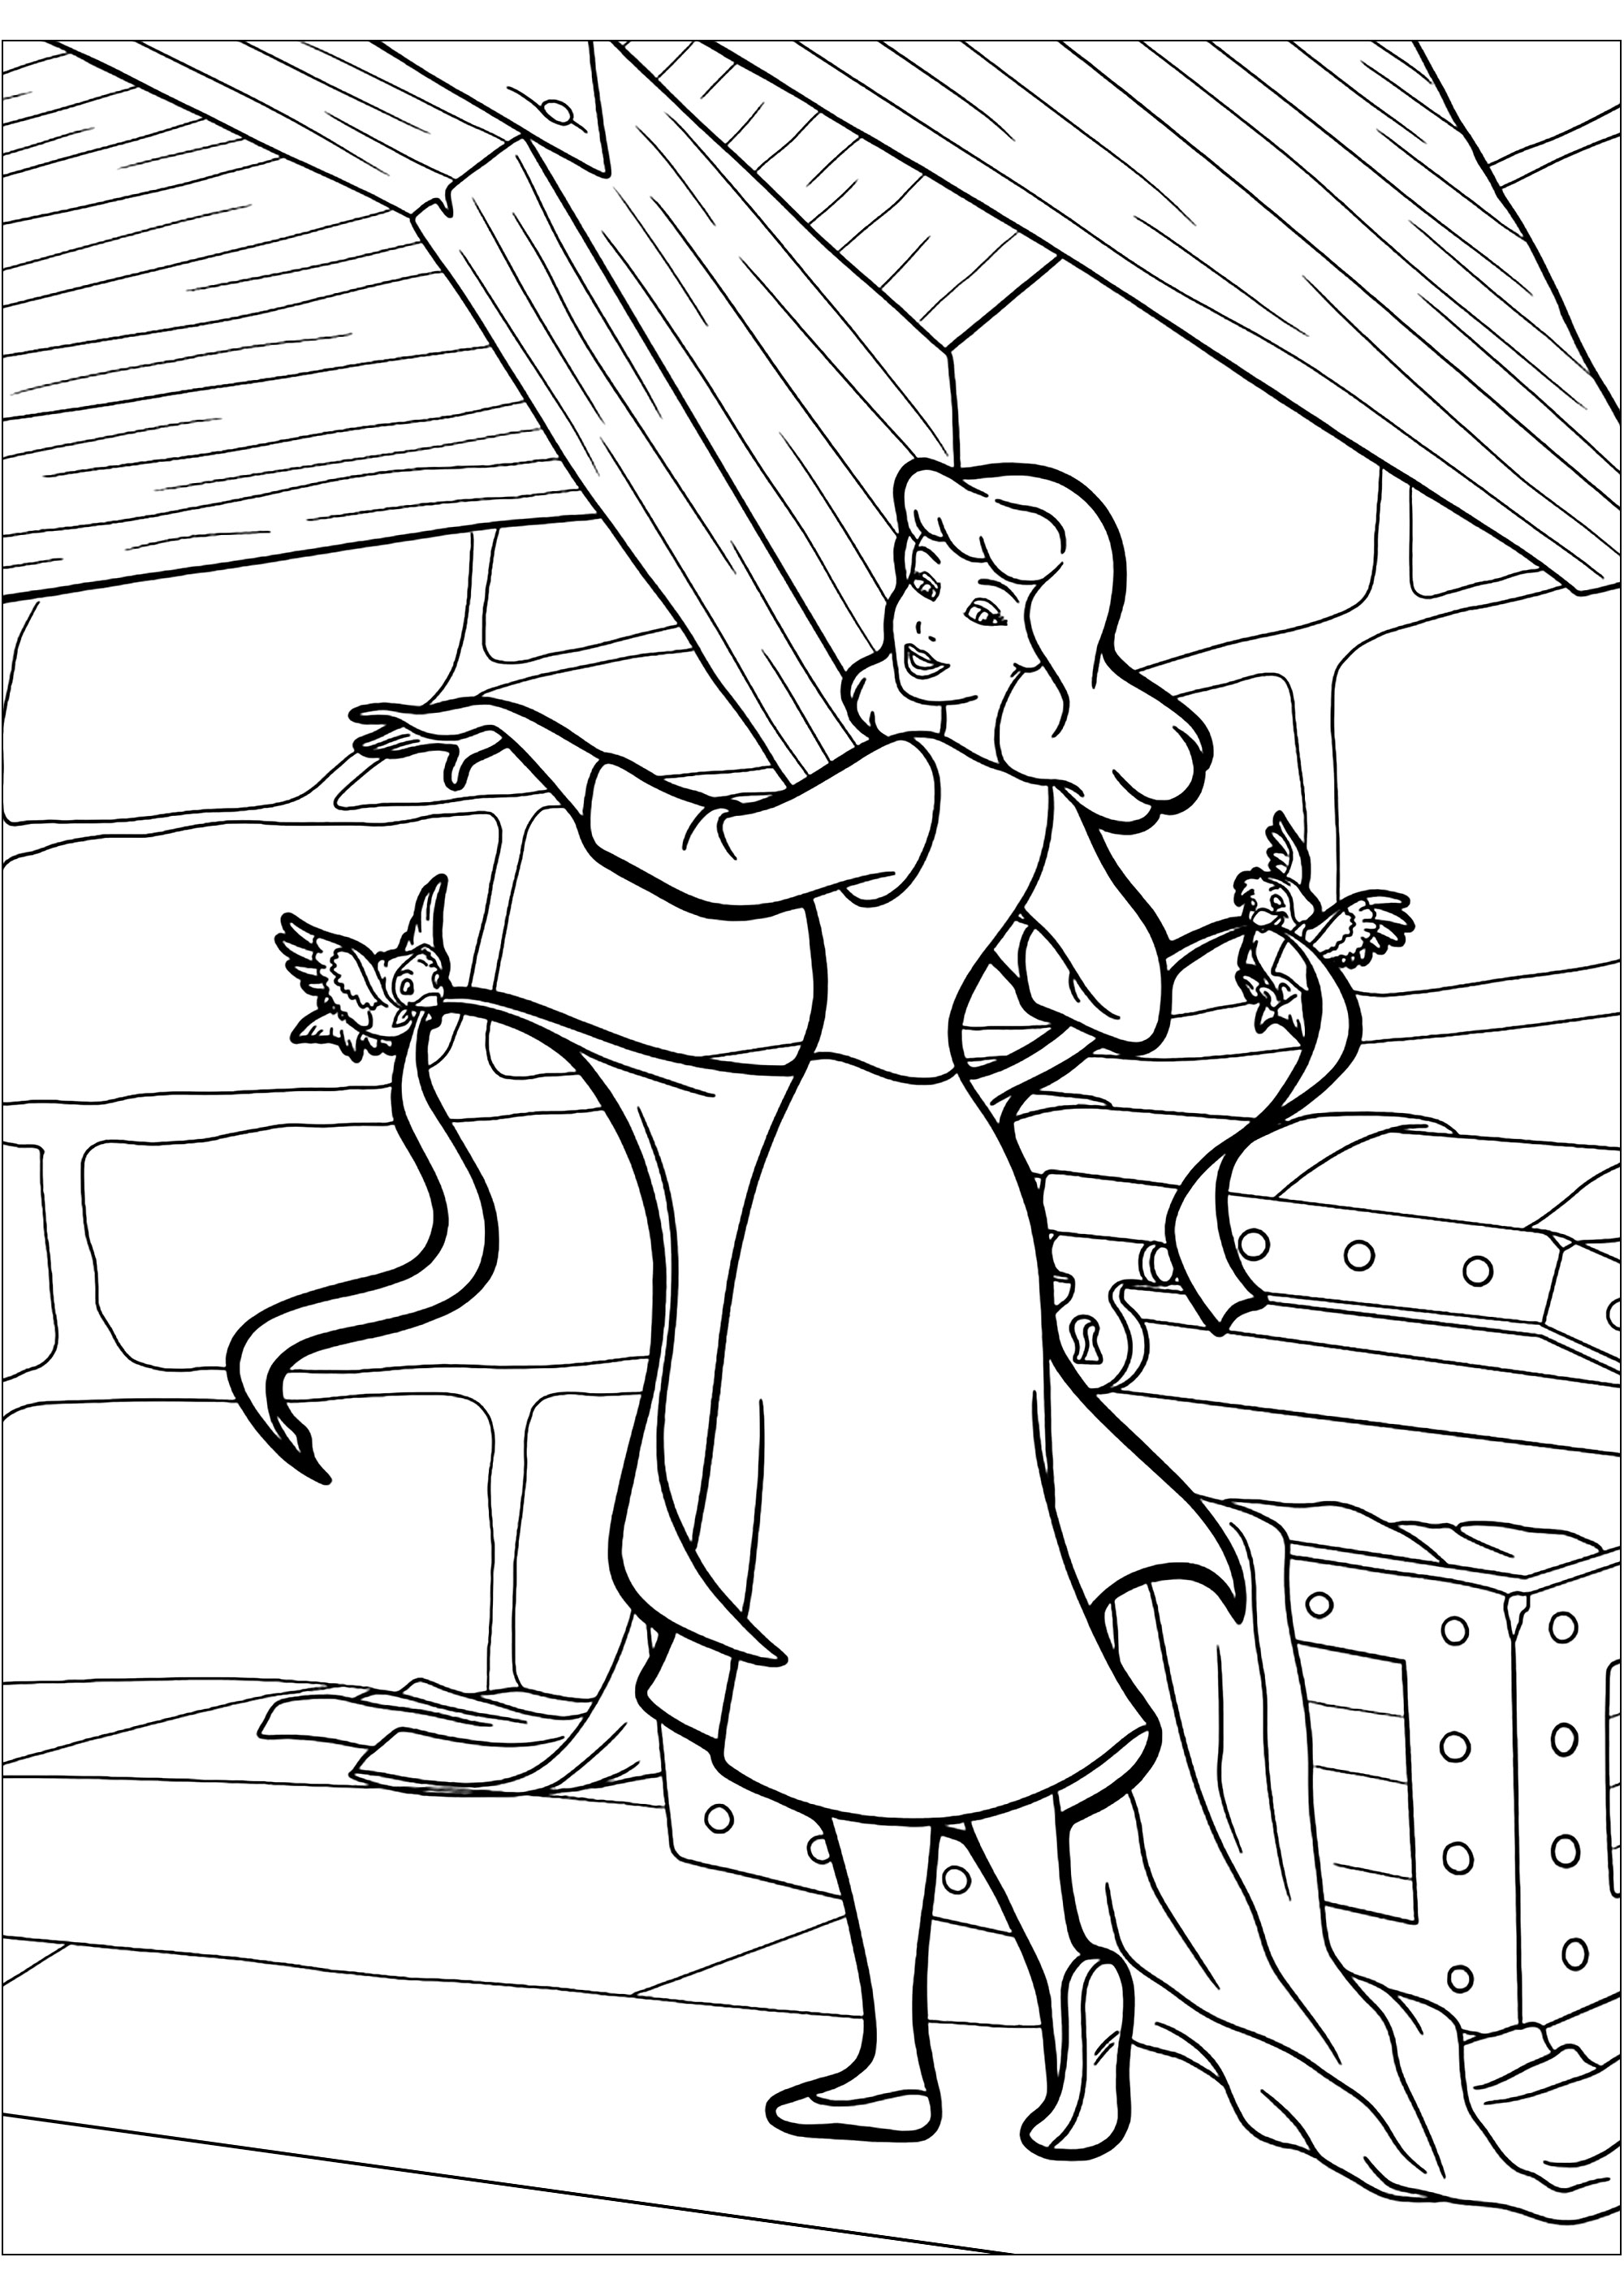 Free Cinderella coloring page to download